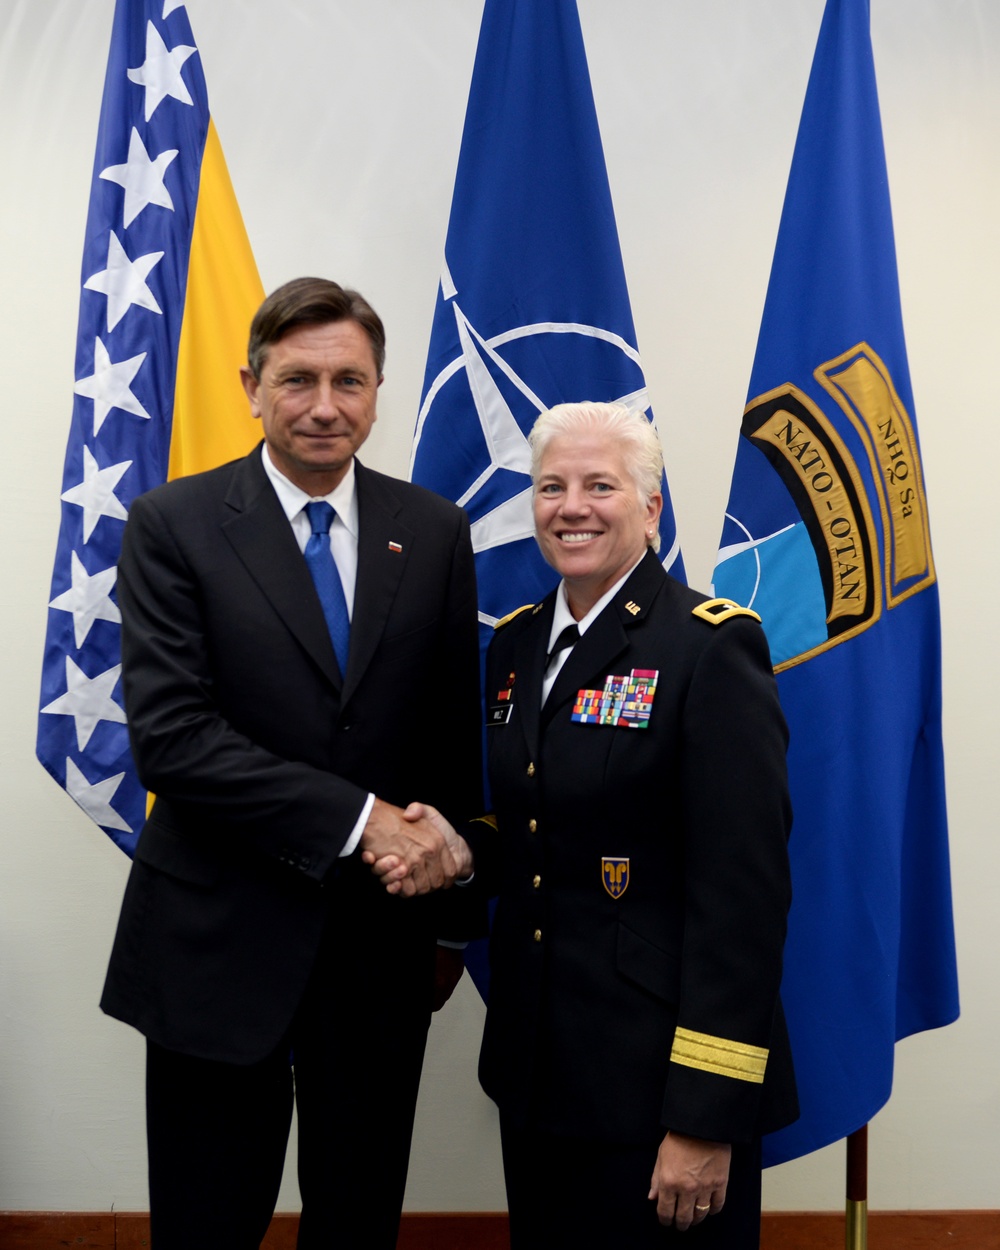 NHQSa commander meets with the President of the Republic of Slovenia